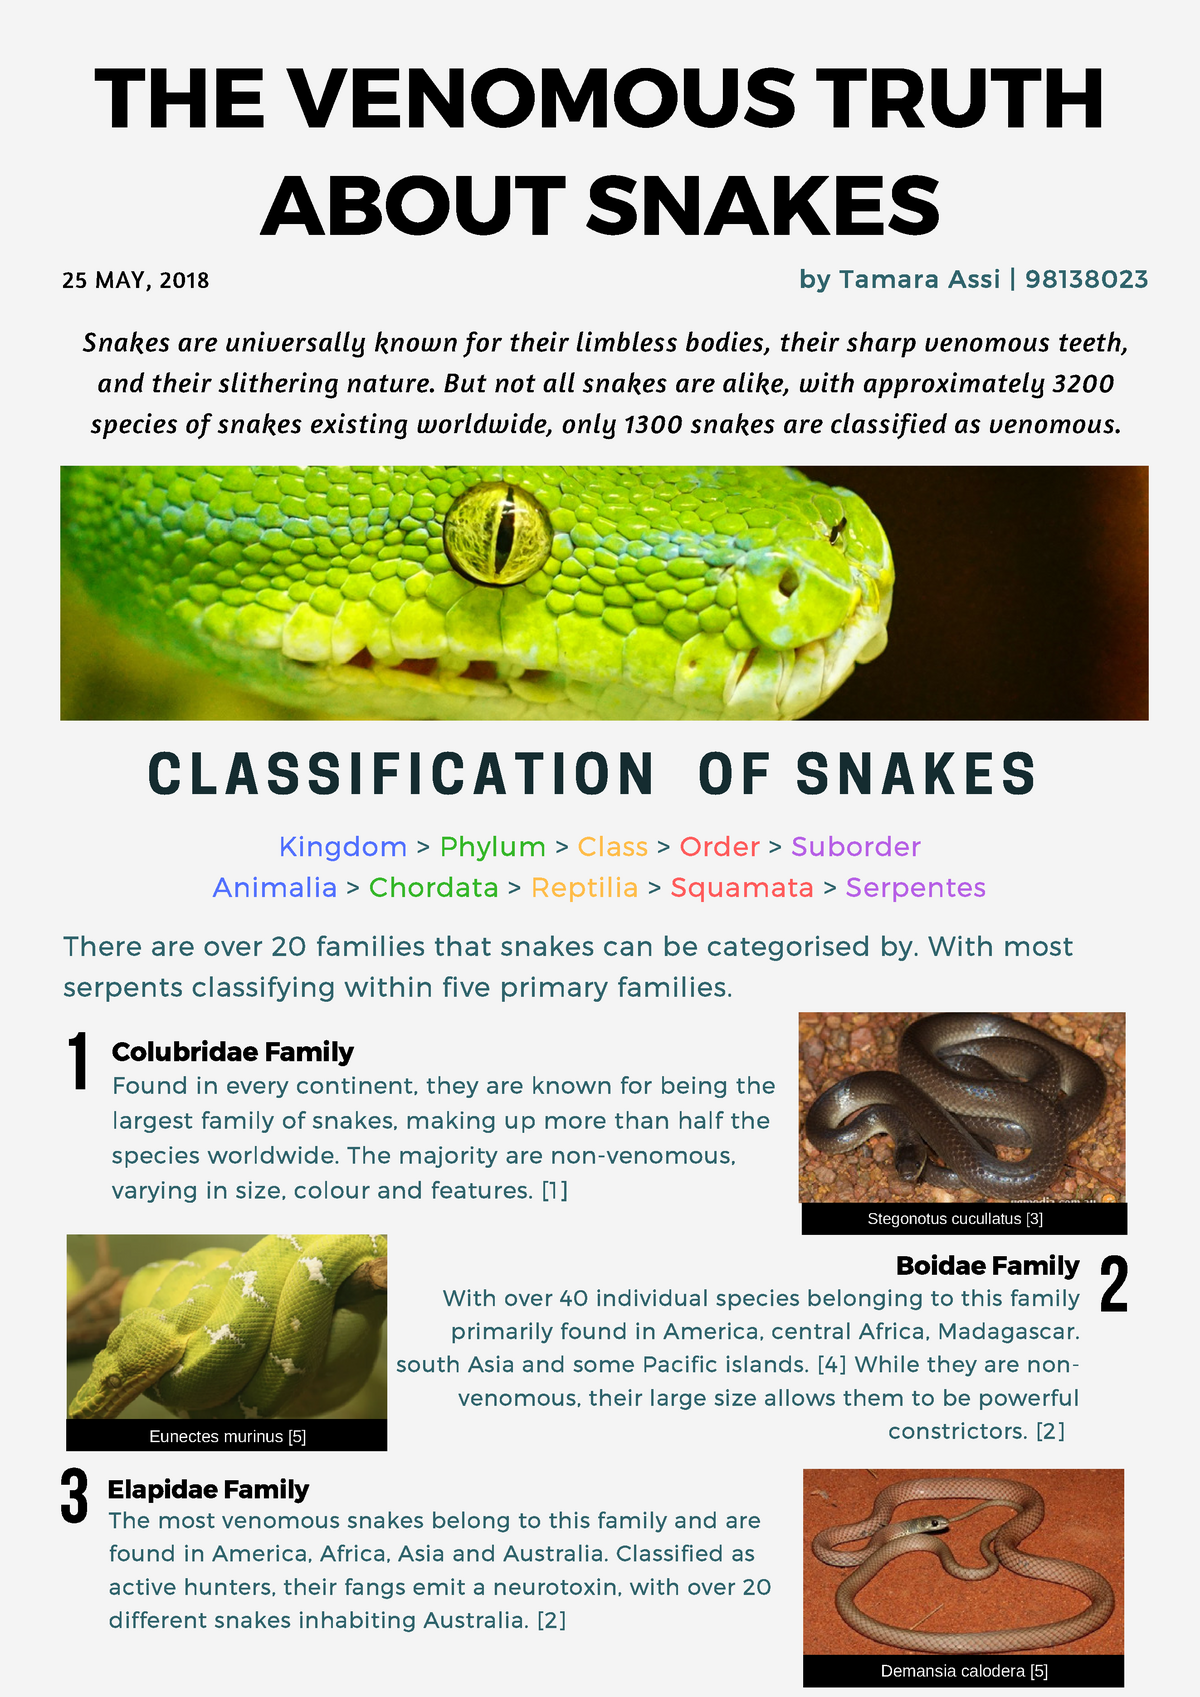 Pharmacology 2 - Assessment 3 - Snakes and Venom - CLASSIFICATION OF ...